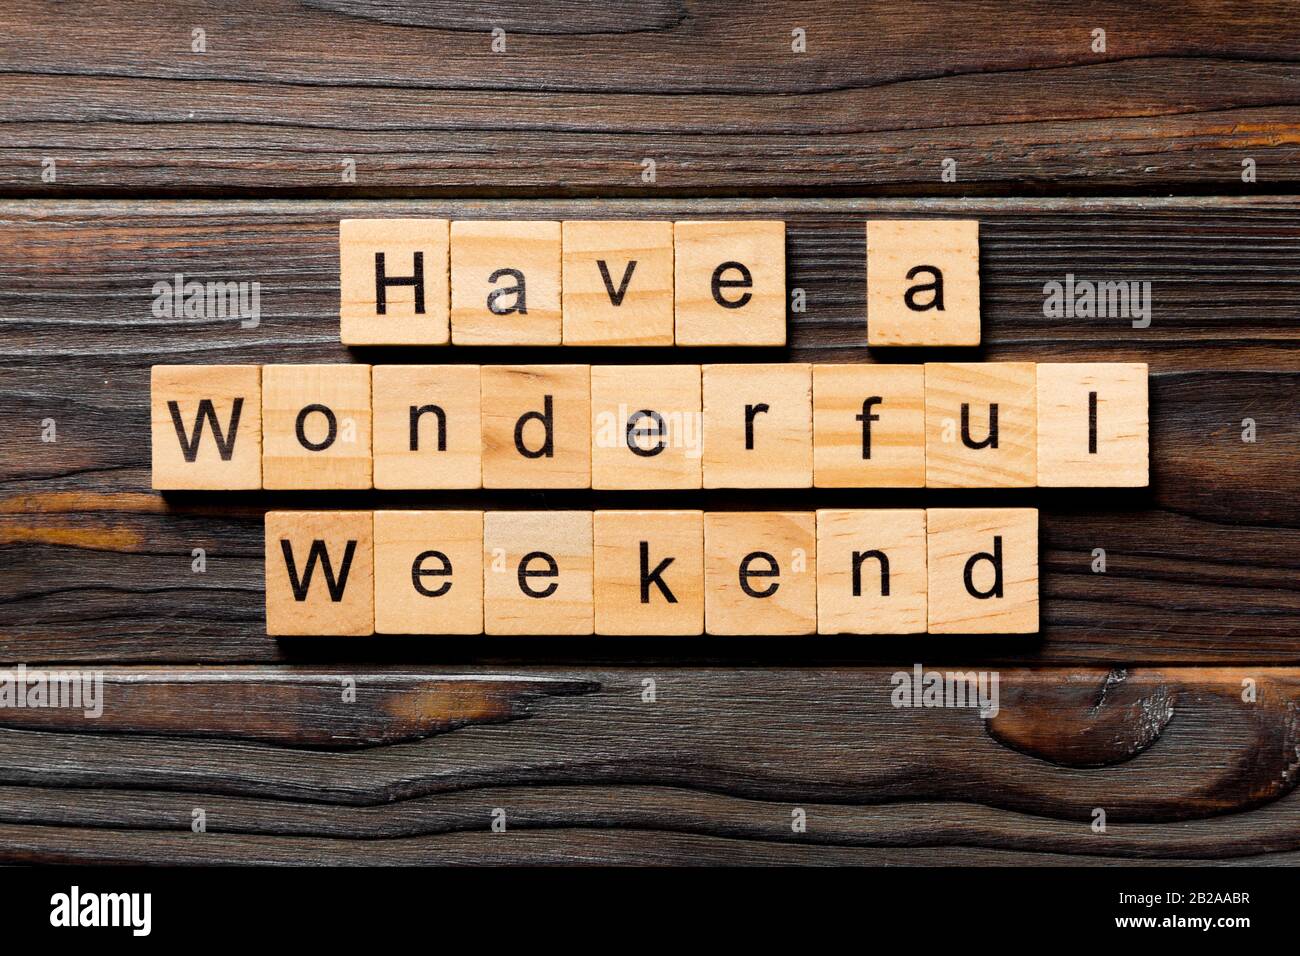 Have a wonderful weekend word written on wood block. Have a wonderful ...